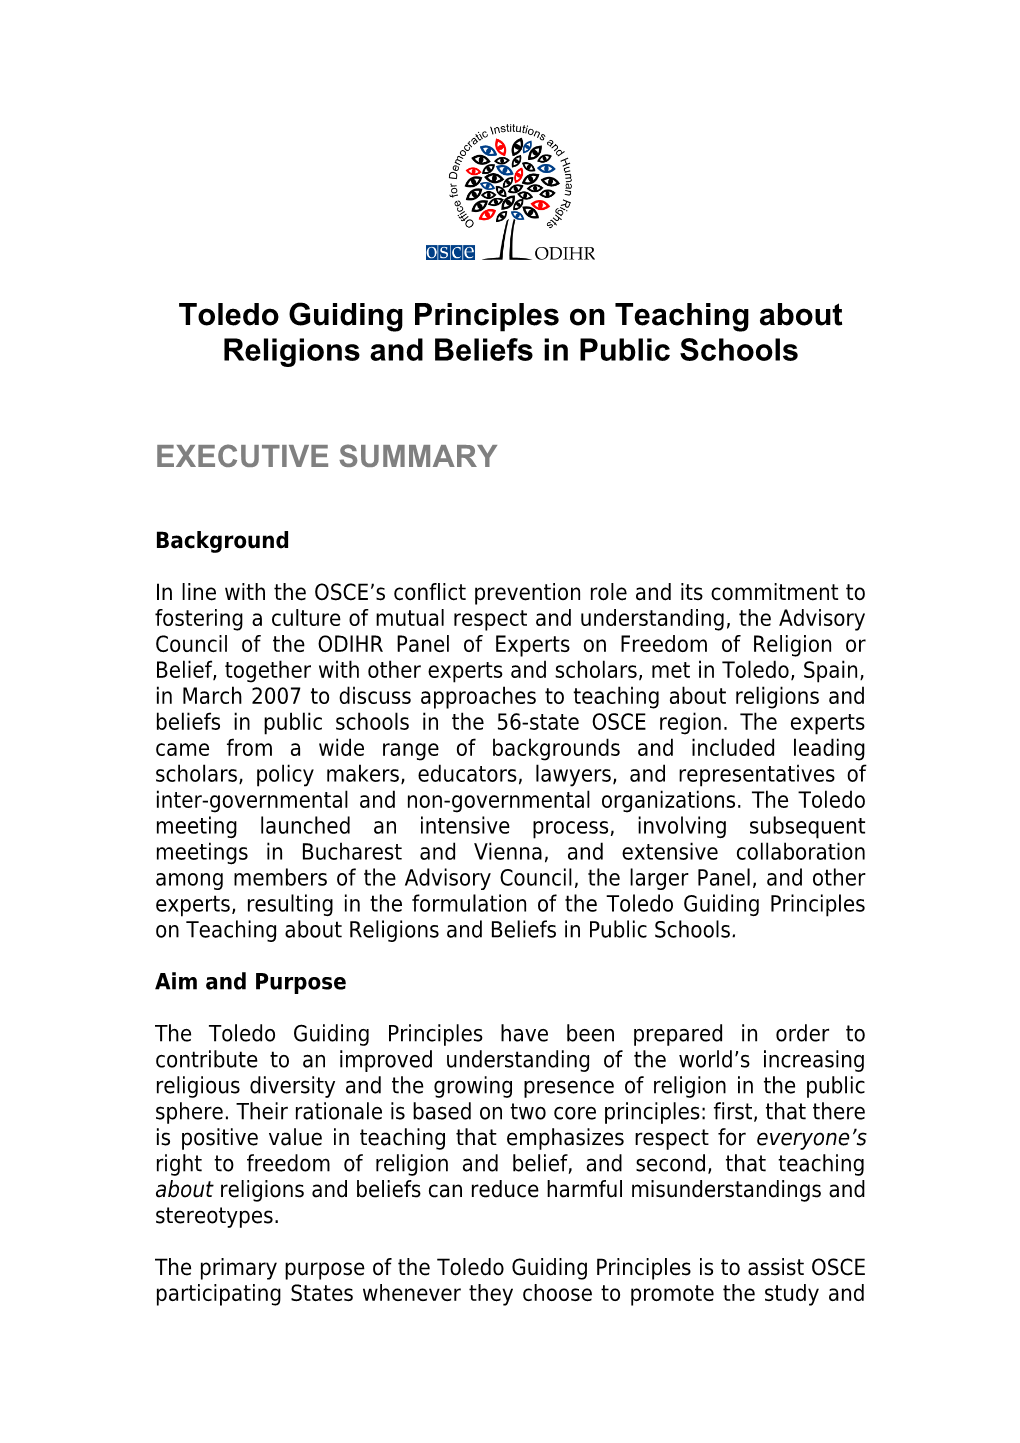 Toledo Guiding Principles on Teaching About Religions and Beliefs in Public Schools